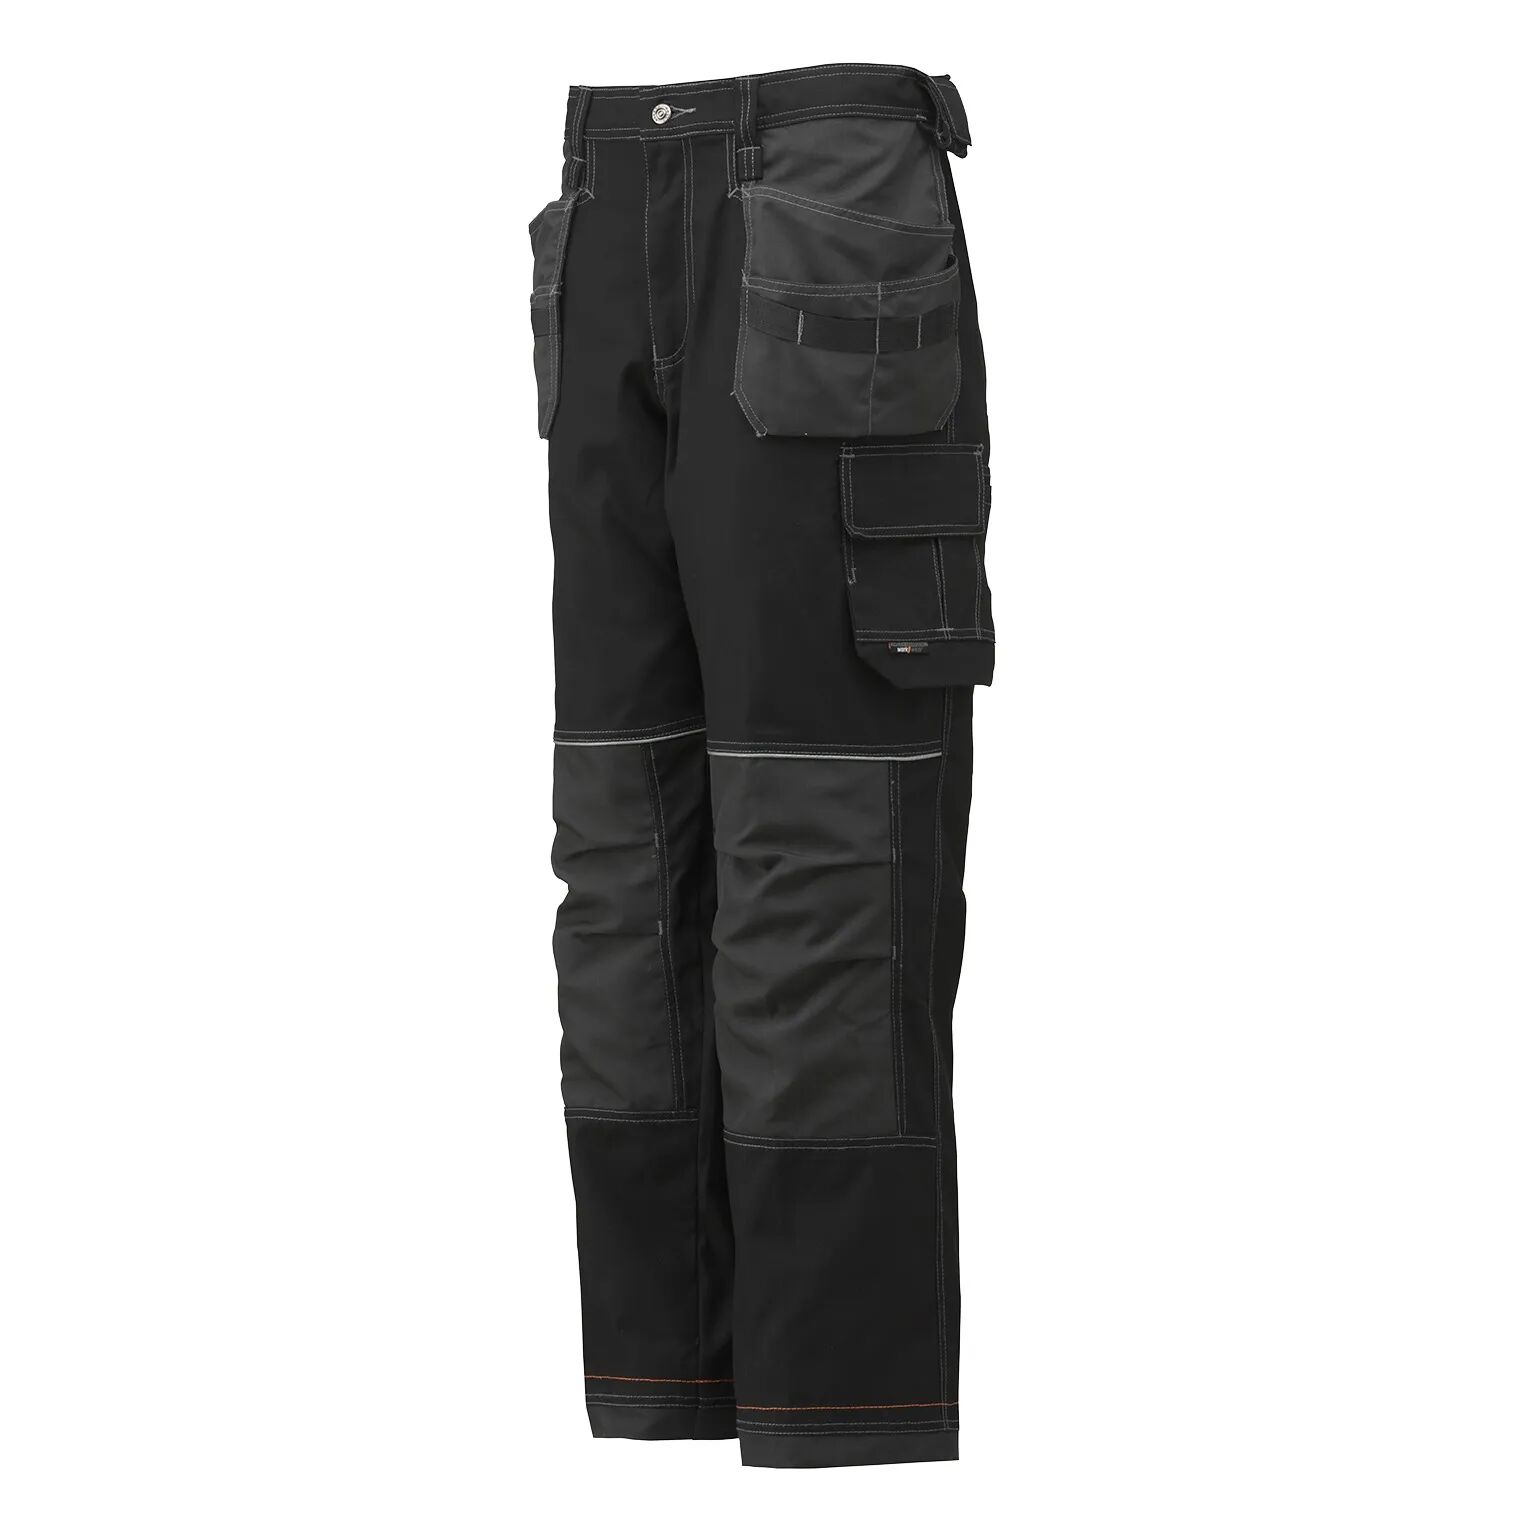 HH Workwear Helly Hansen WorkwearChelsea Lined Cons. Pant Black 30/30